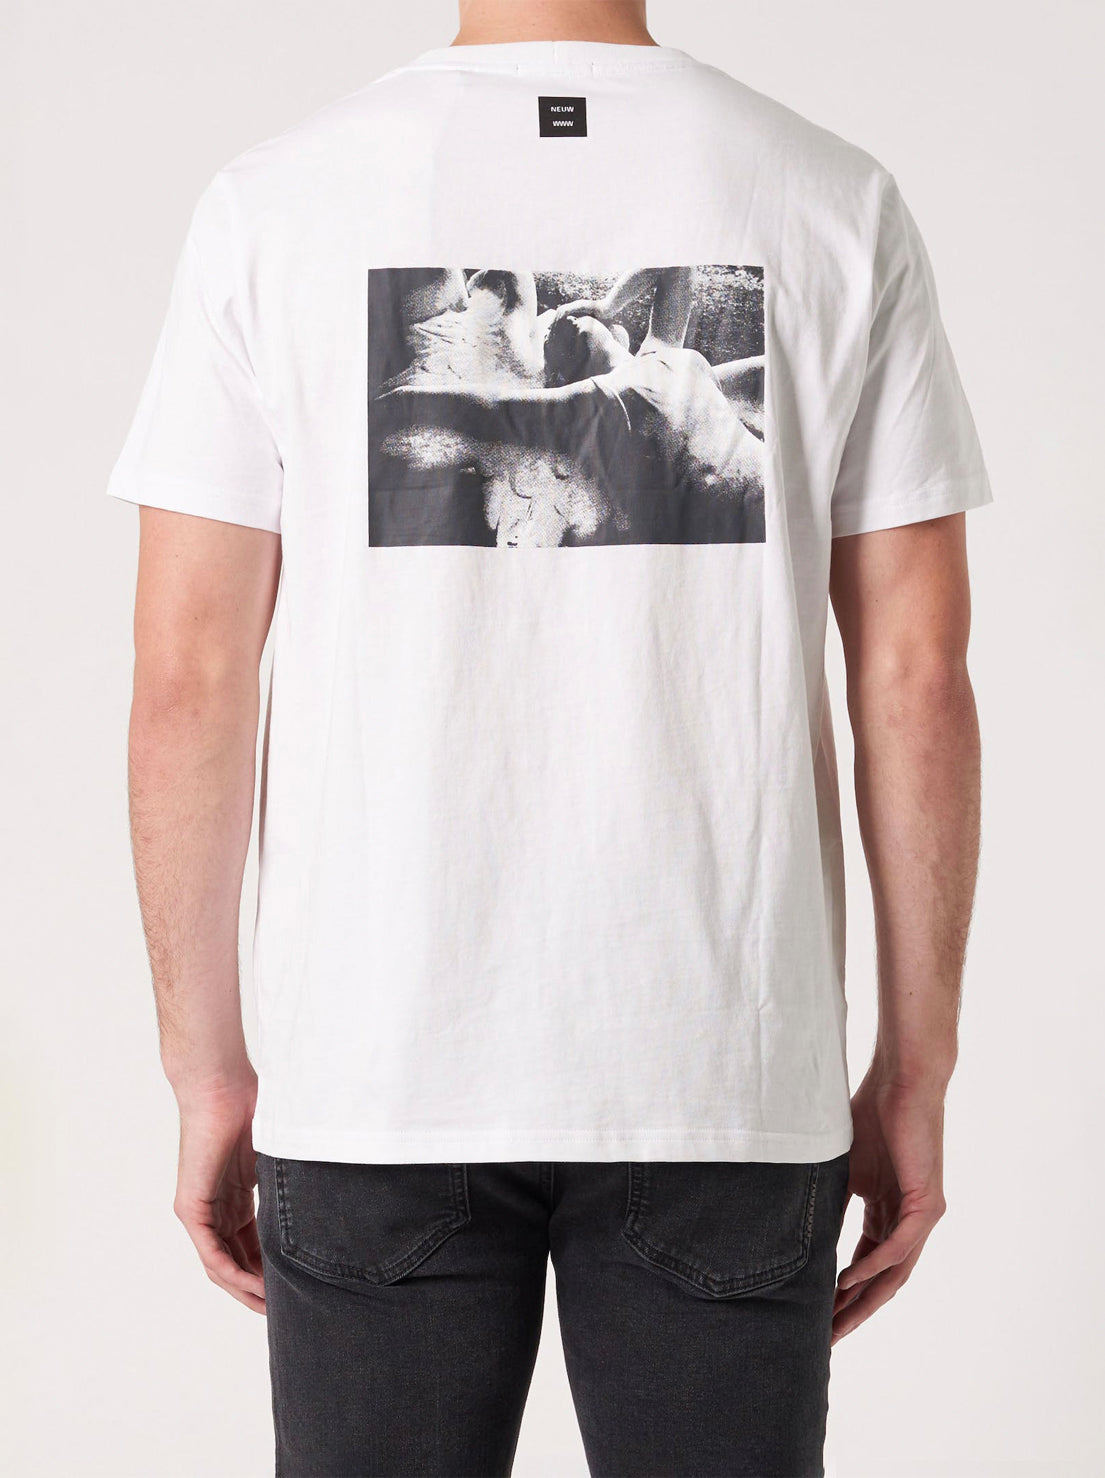 Load image into Gallery viewer, Neuw - Joy Division Love Band Tee - White
